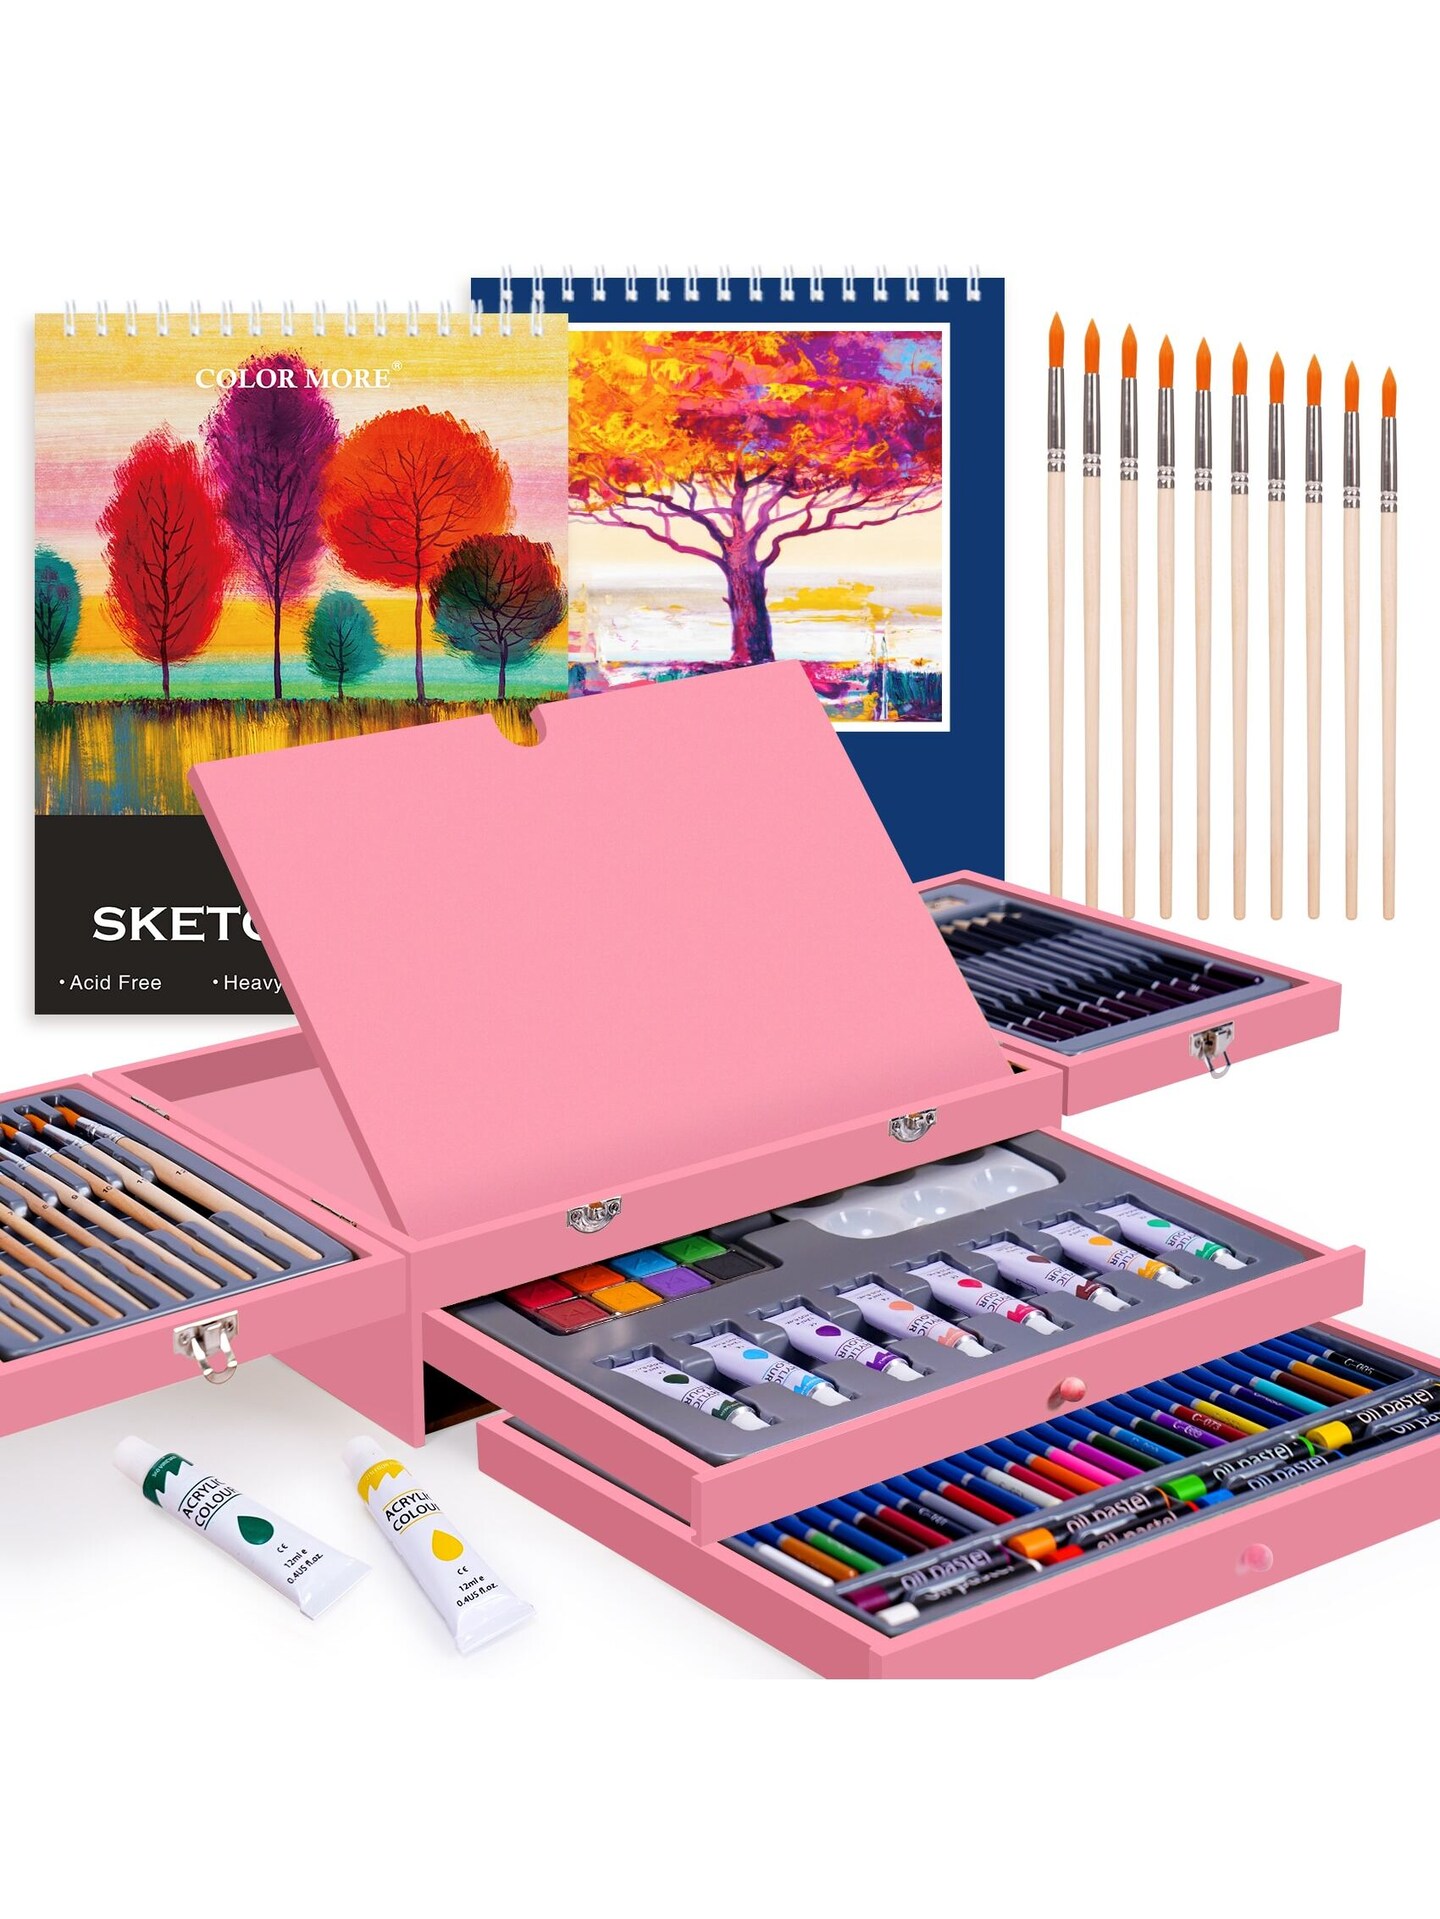 Paint Set,85 Piece Deluxe Wooden Art Set Crafts Drawing Painting Kit with Easel and 2 Drawing Pads, Creative Gift Box for Teens Adults Artist Beginners,Art Kit,Art Supplies